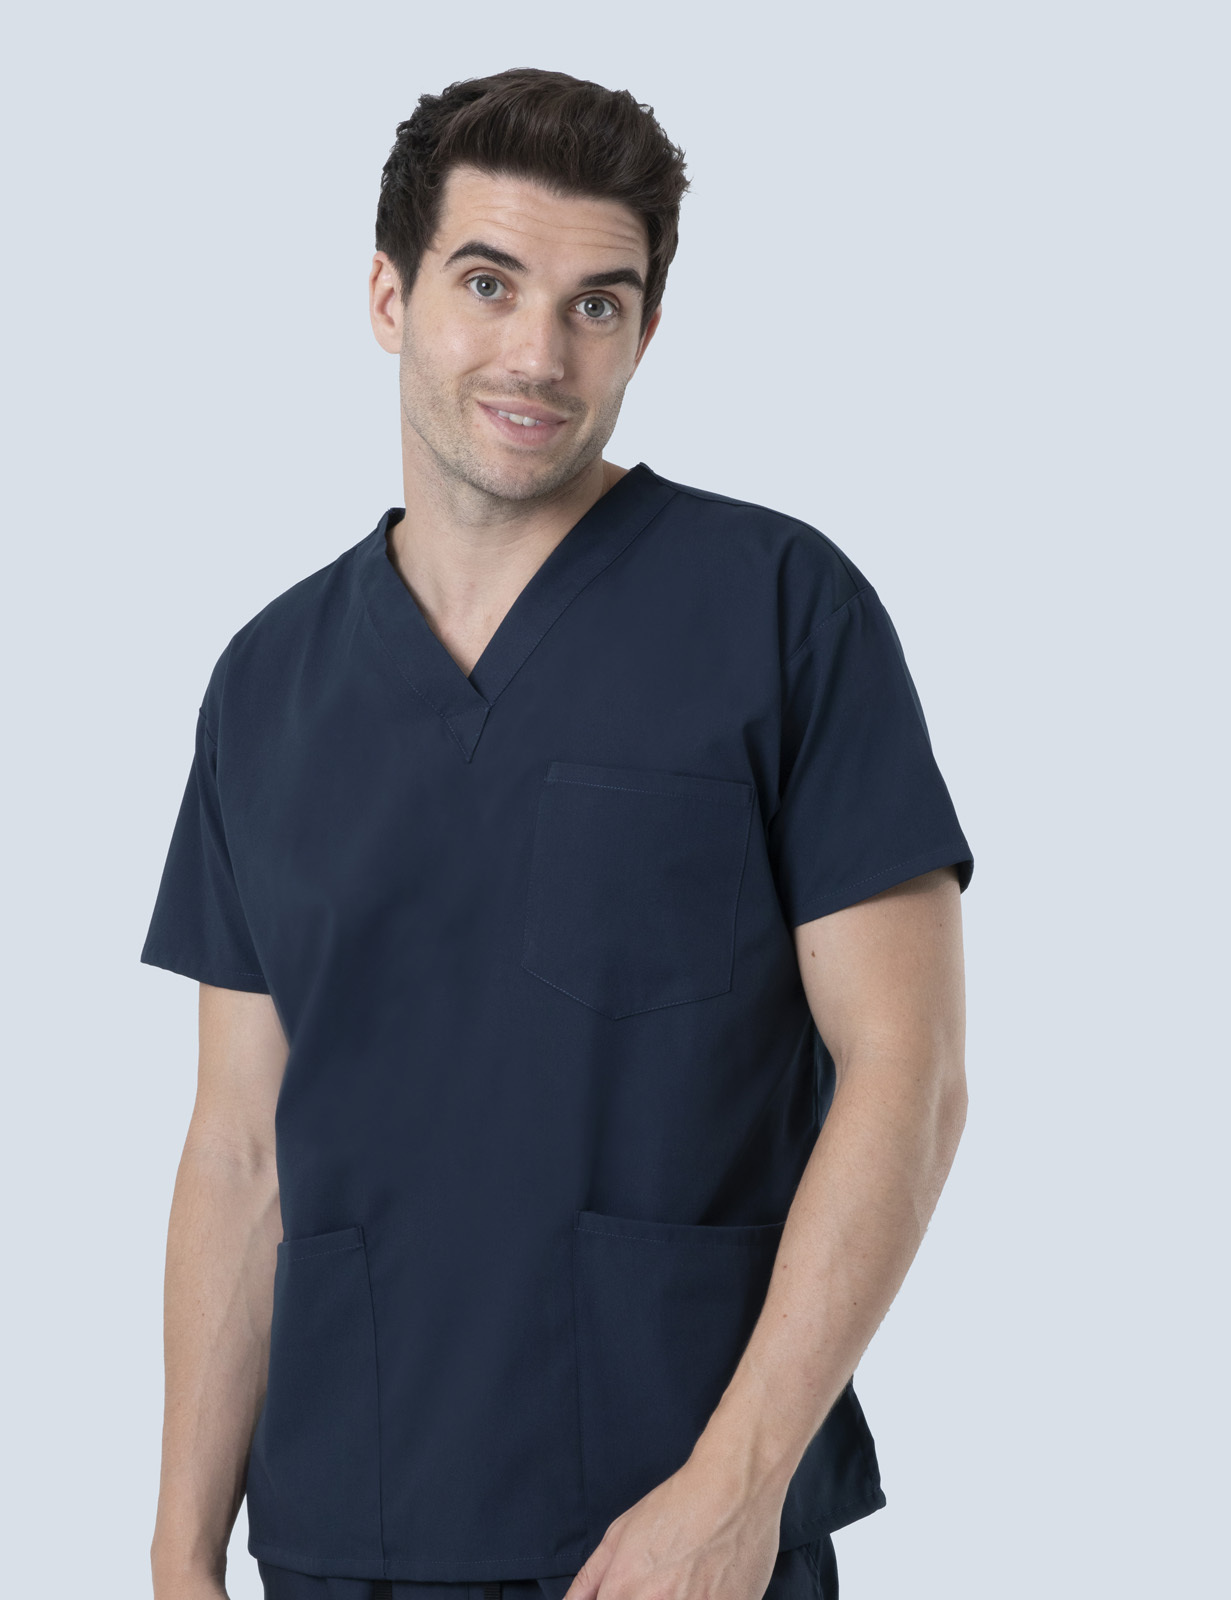 RBWH - 7BN Neurology and Stroke NUM (4 Pocket Scrub Top and Cargo Pants in Navy incl Logos)